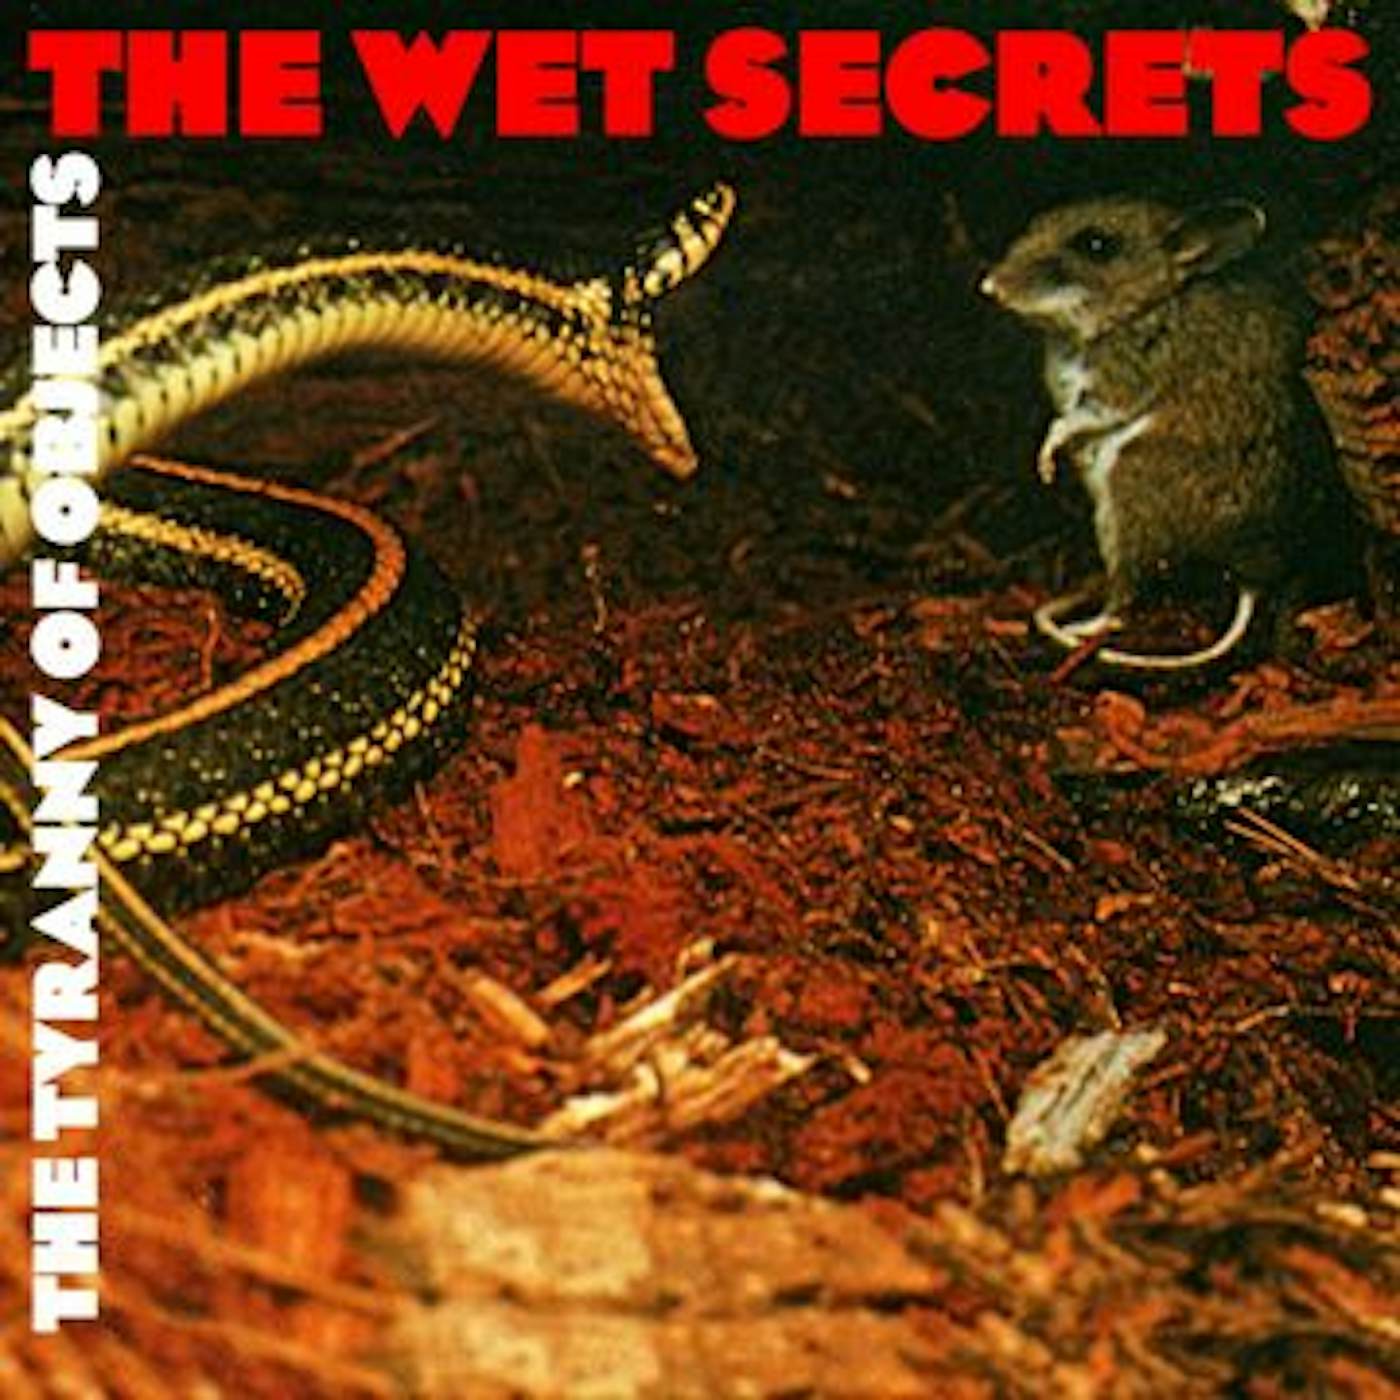 The Wet Secrets TYRANNY OF OBJECTS CD